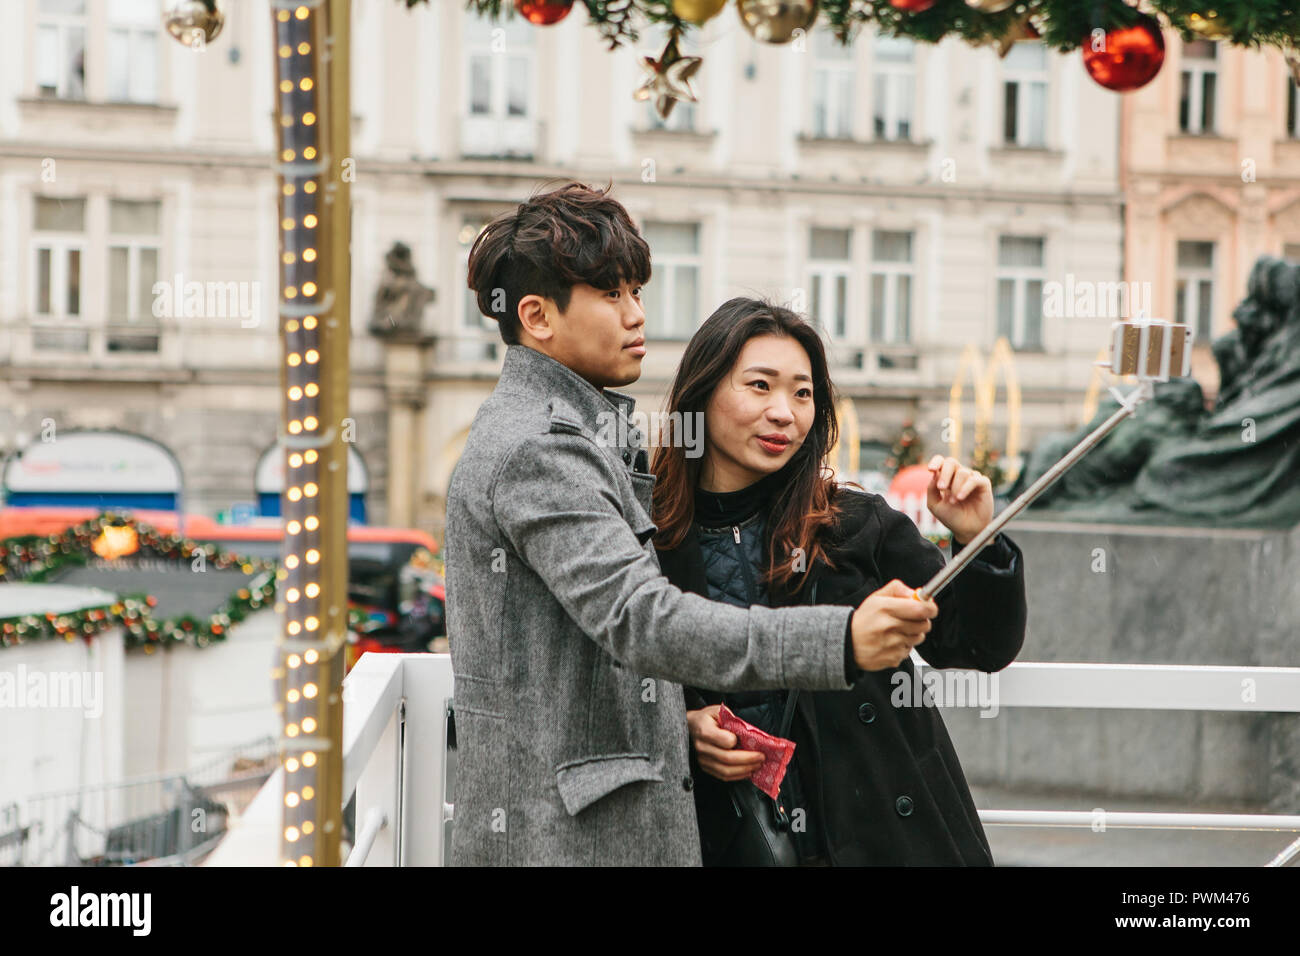 Prague, December 25, 2017: Young Asian couple taking selfie in memory of Prague in the Czech Republic during the Christmas holidays. Stock Photo